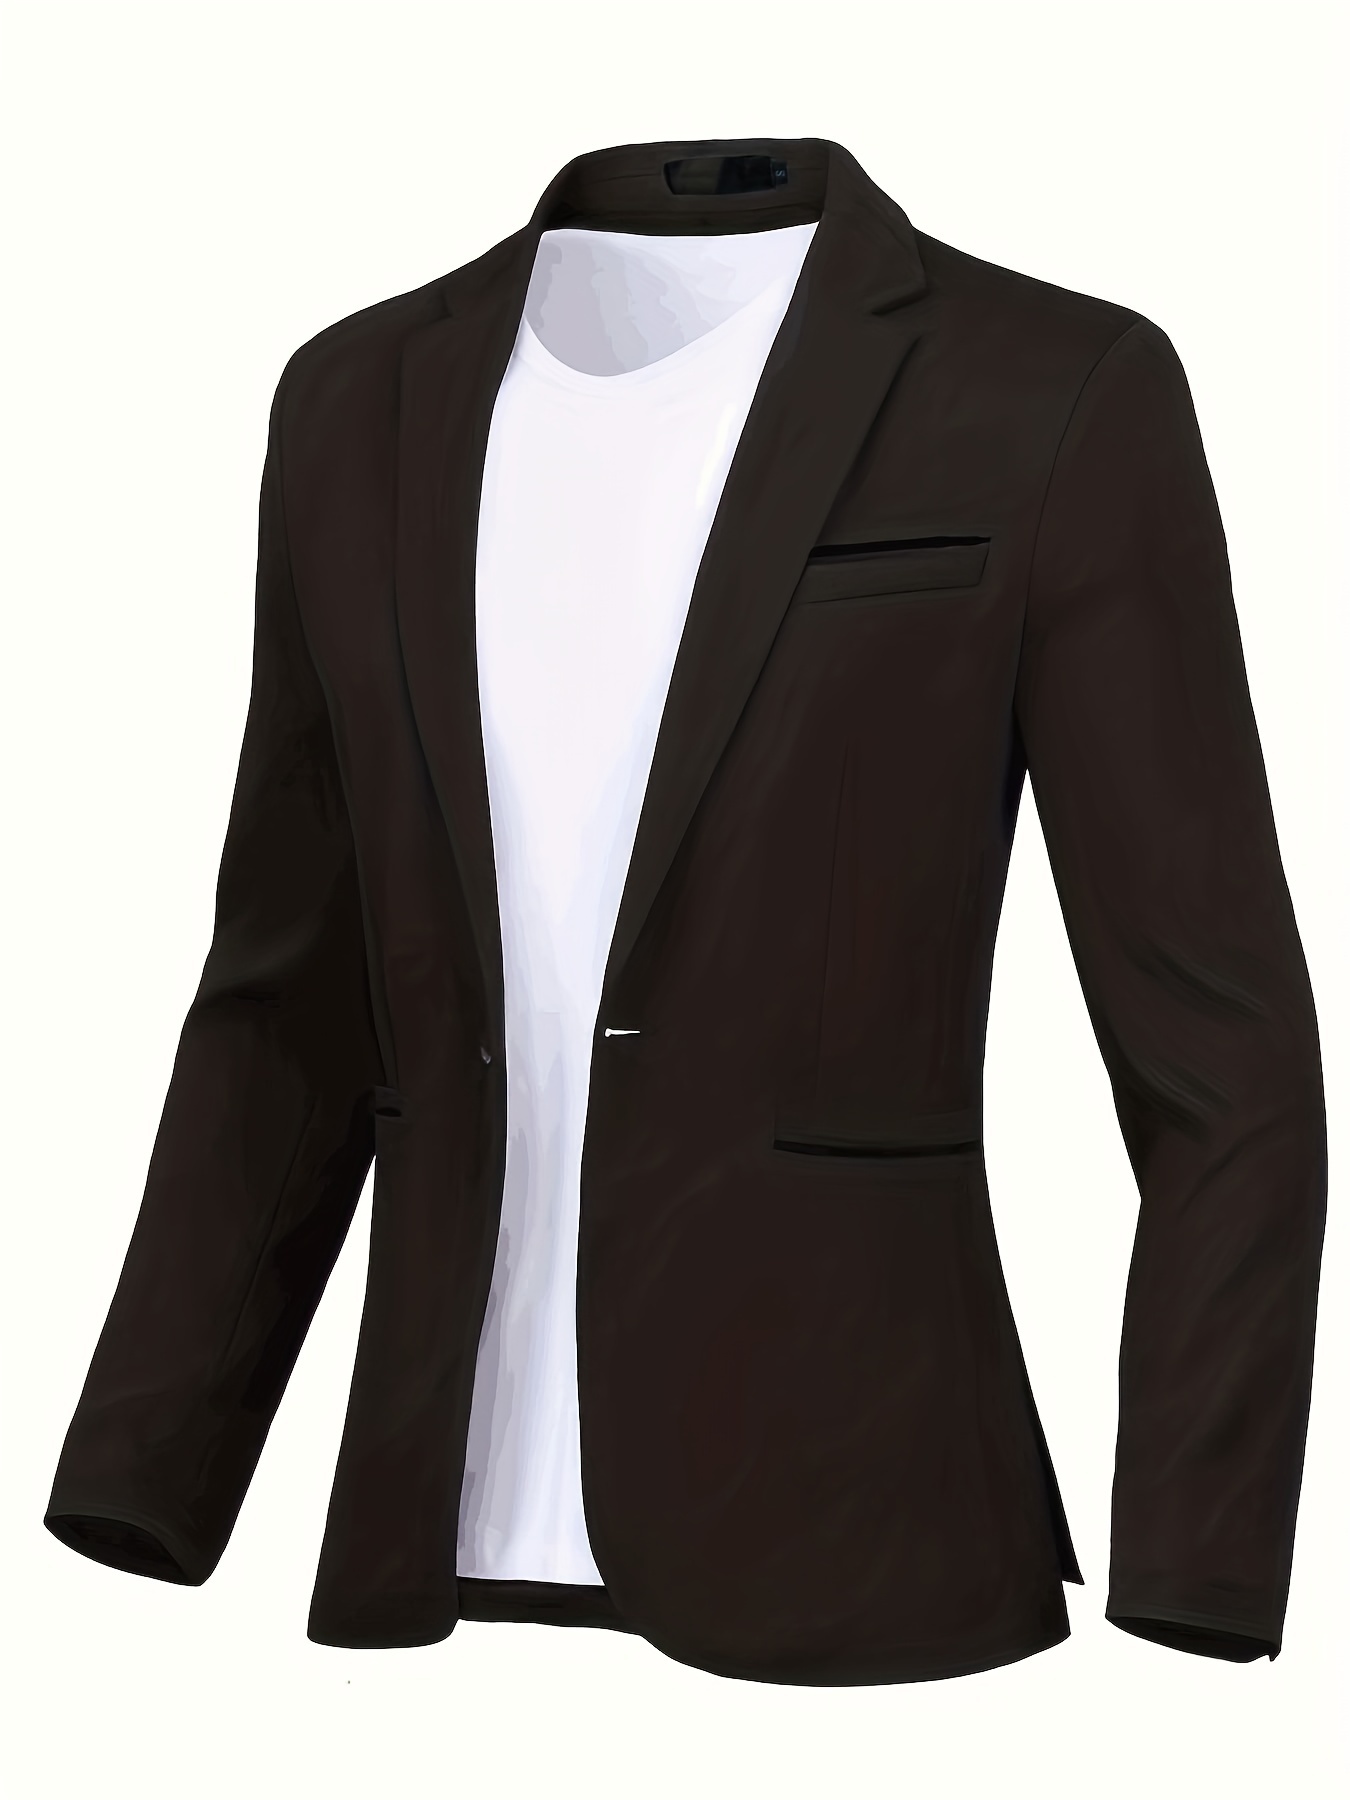 Mens Blazer Jacket Big and Tall Lightweight Fashion Casual One Button Slim  Fit Business Suit Jacket